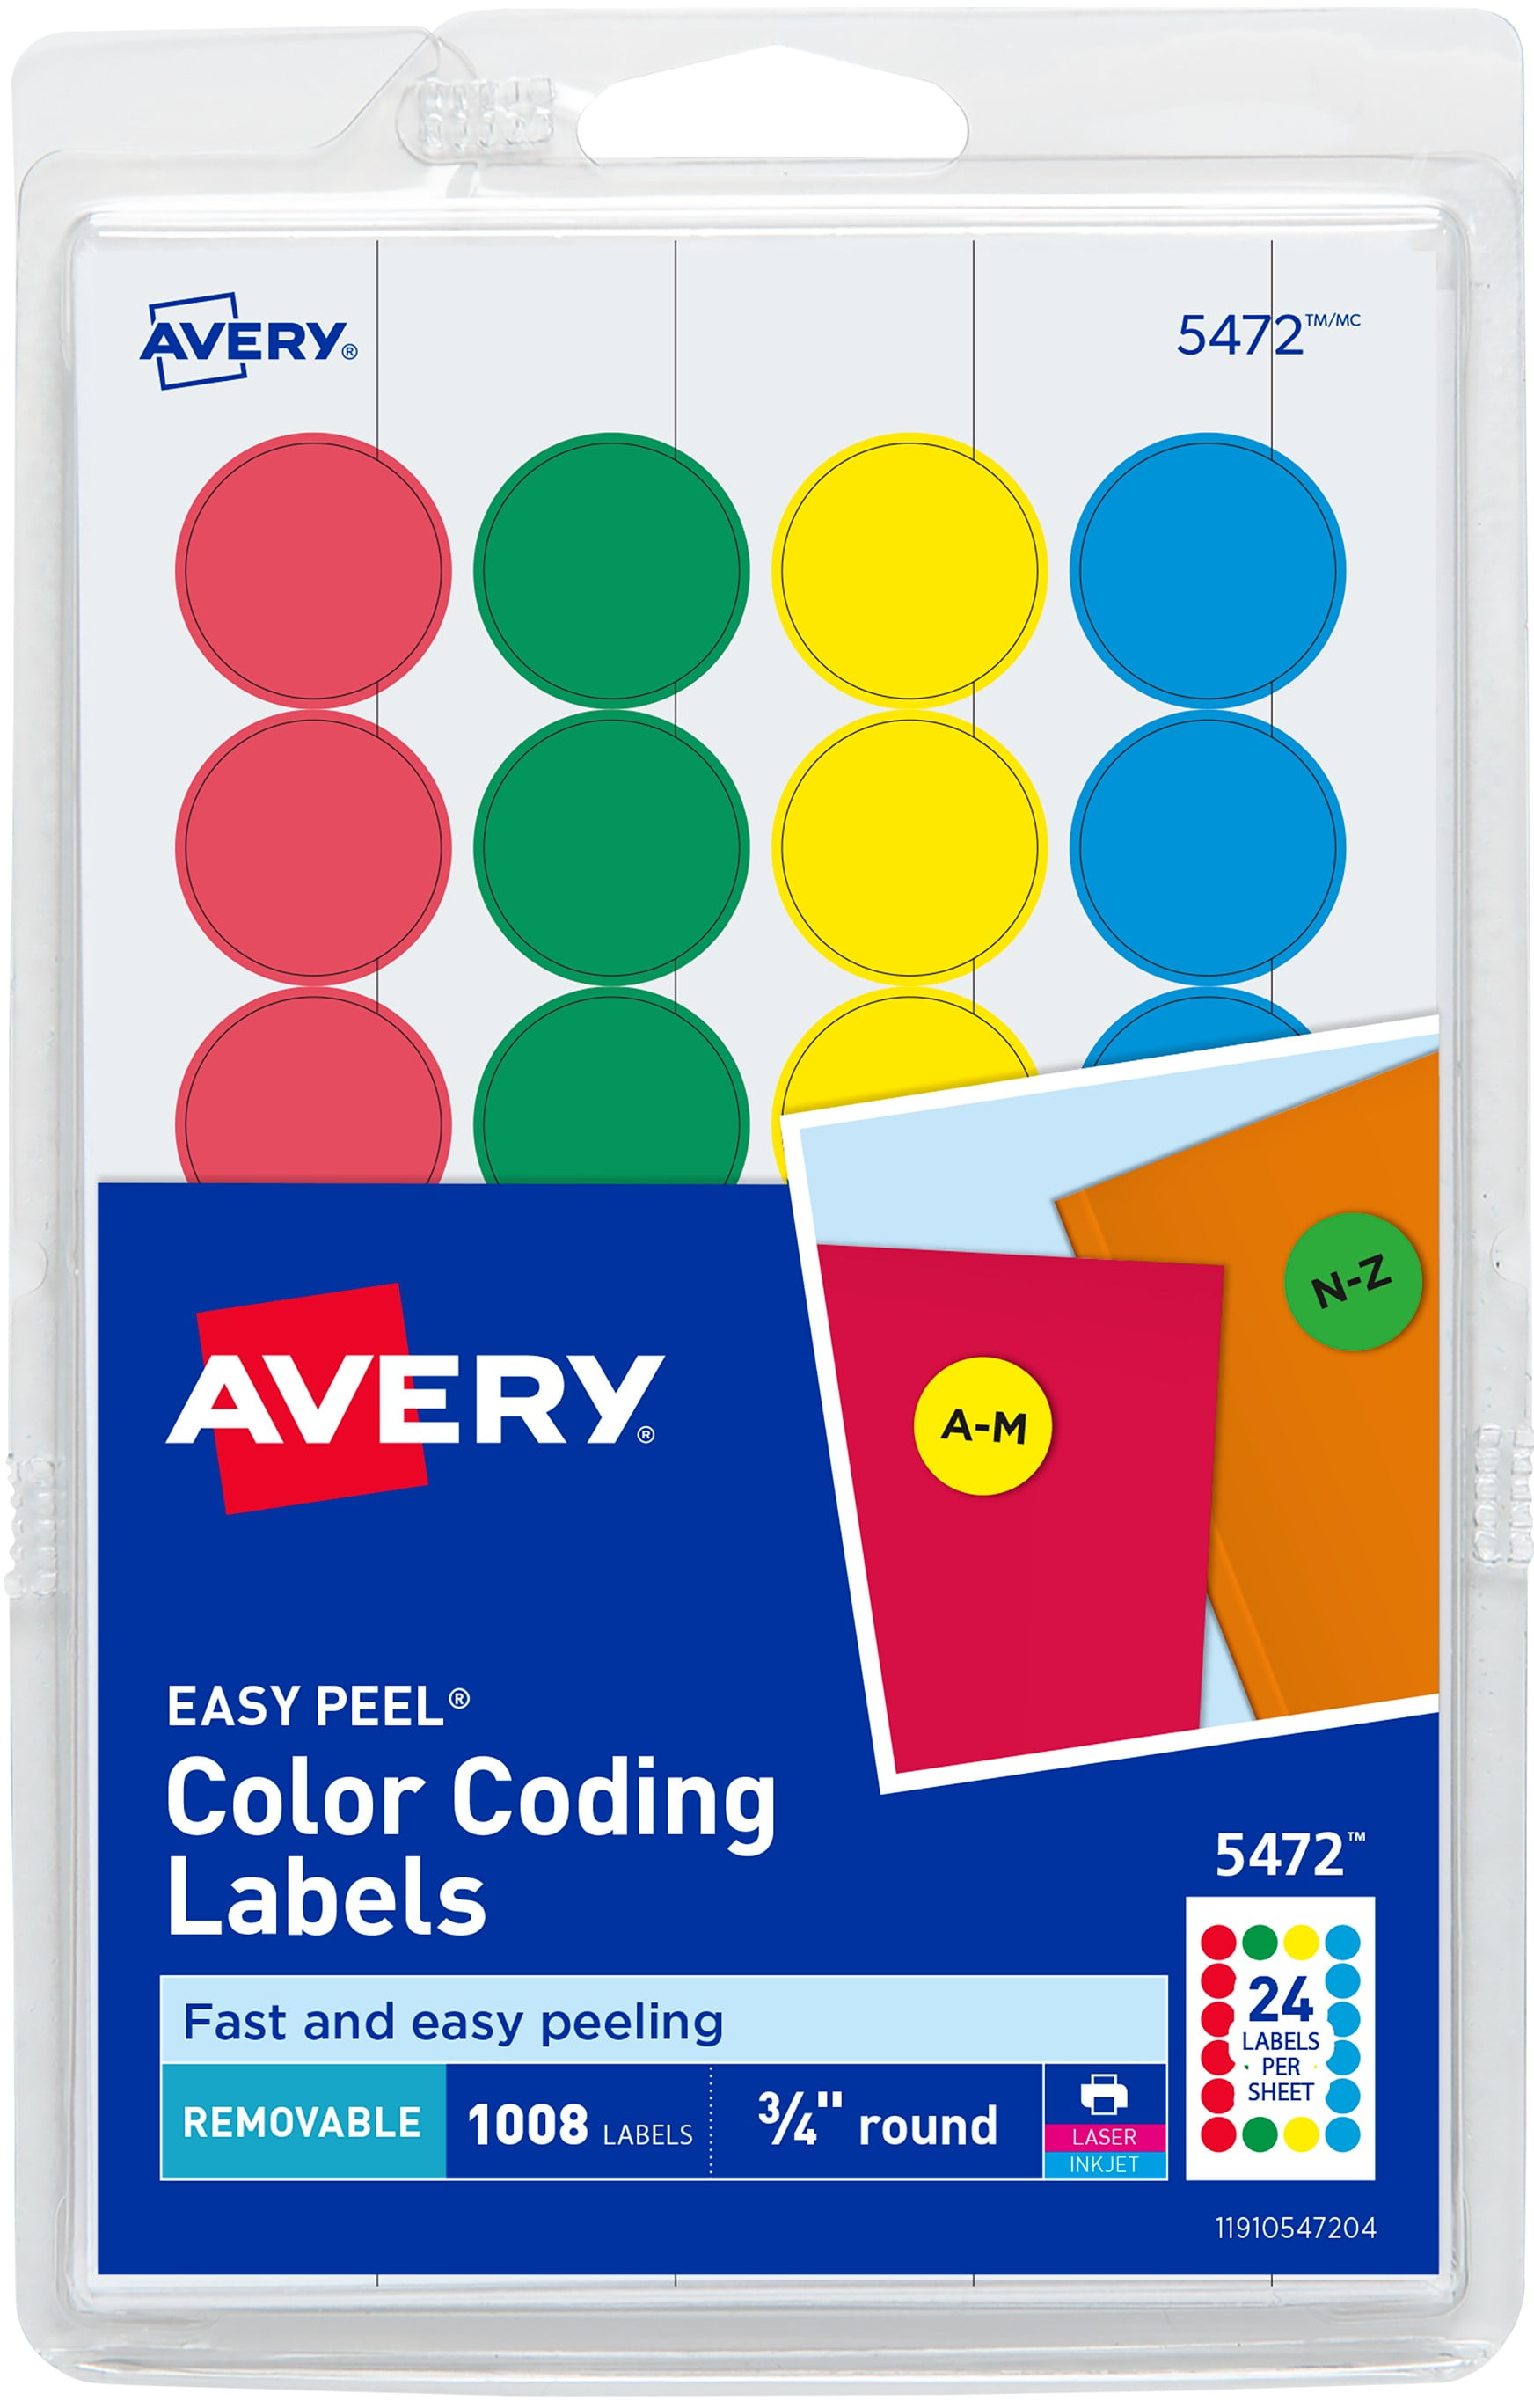 Avery Color Coding Labels, Assorted Primary Colors, 3/4" Round, Removable, 1008 Labels (15472)